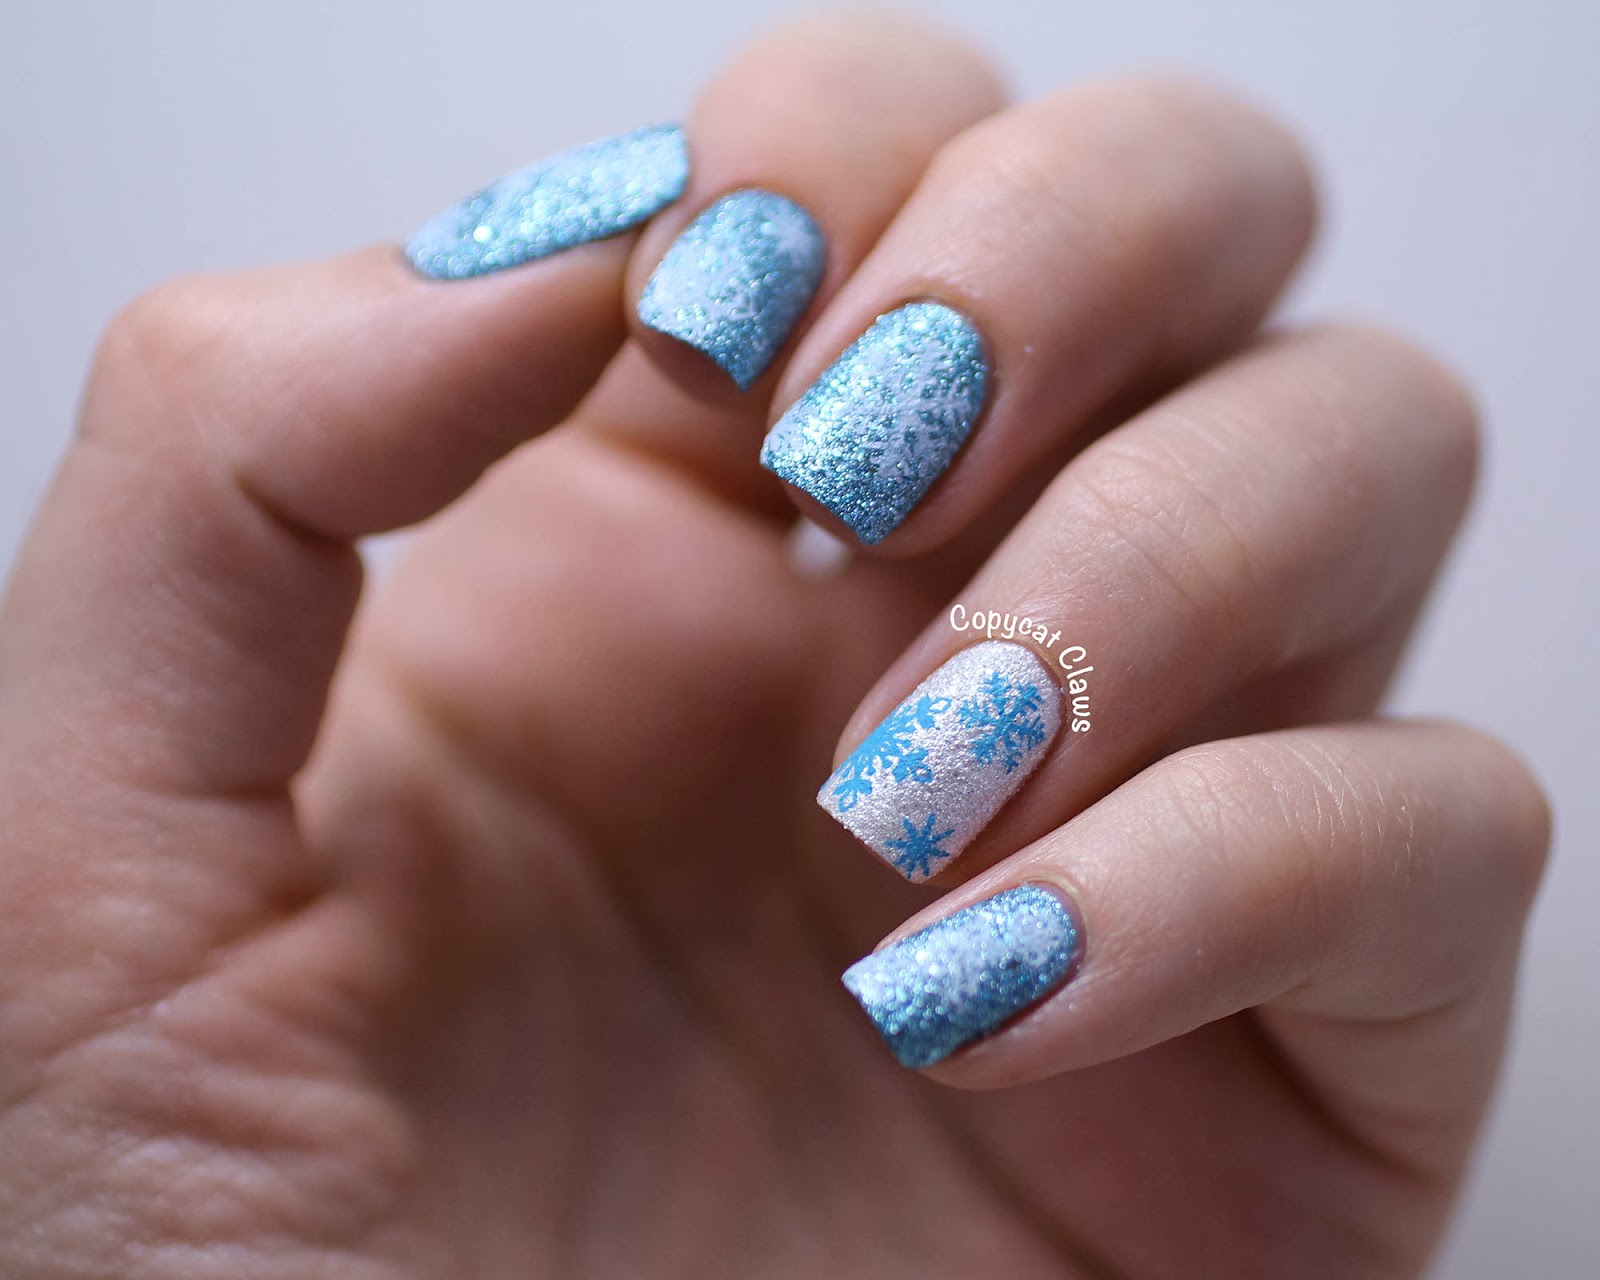 10. Snowflake Nail Art Tutorial with Stamping - wide 6